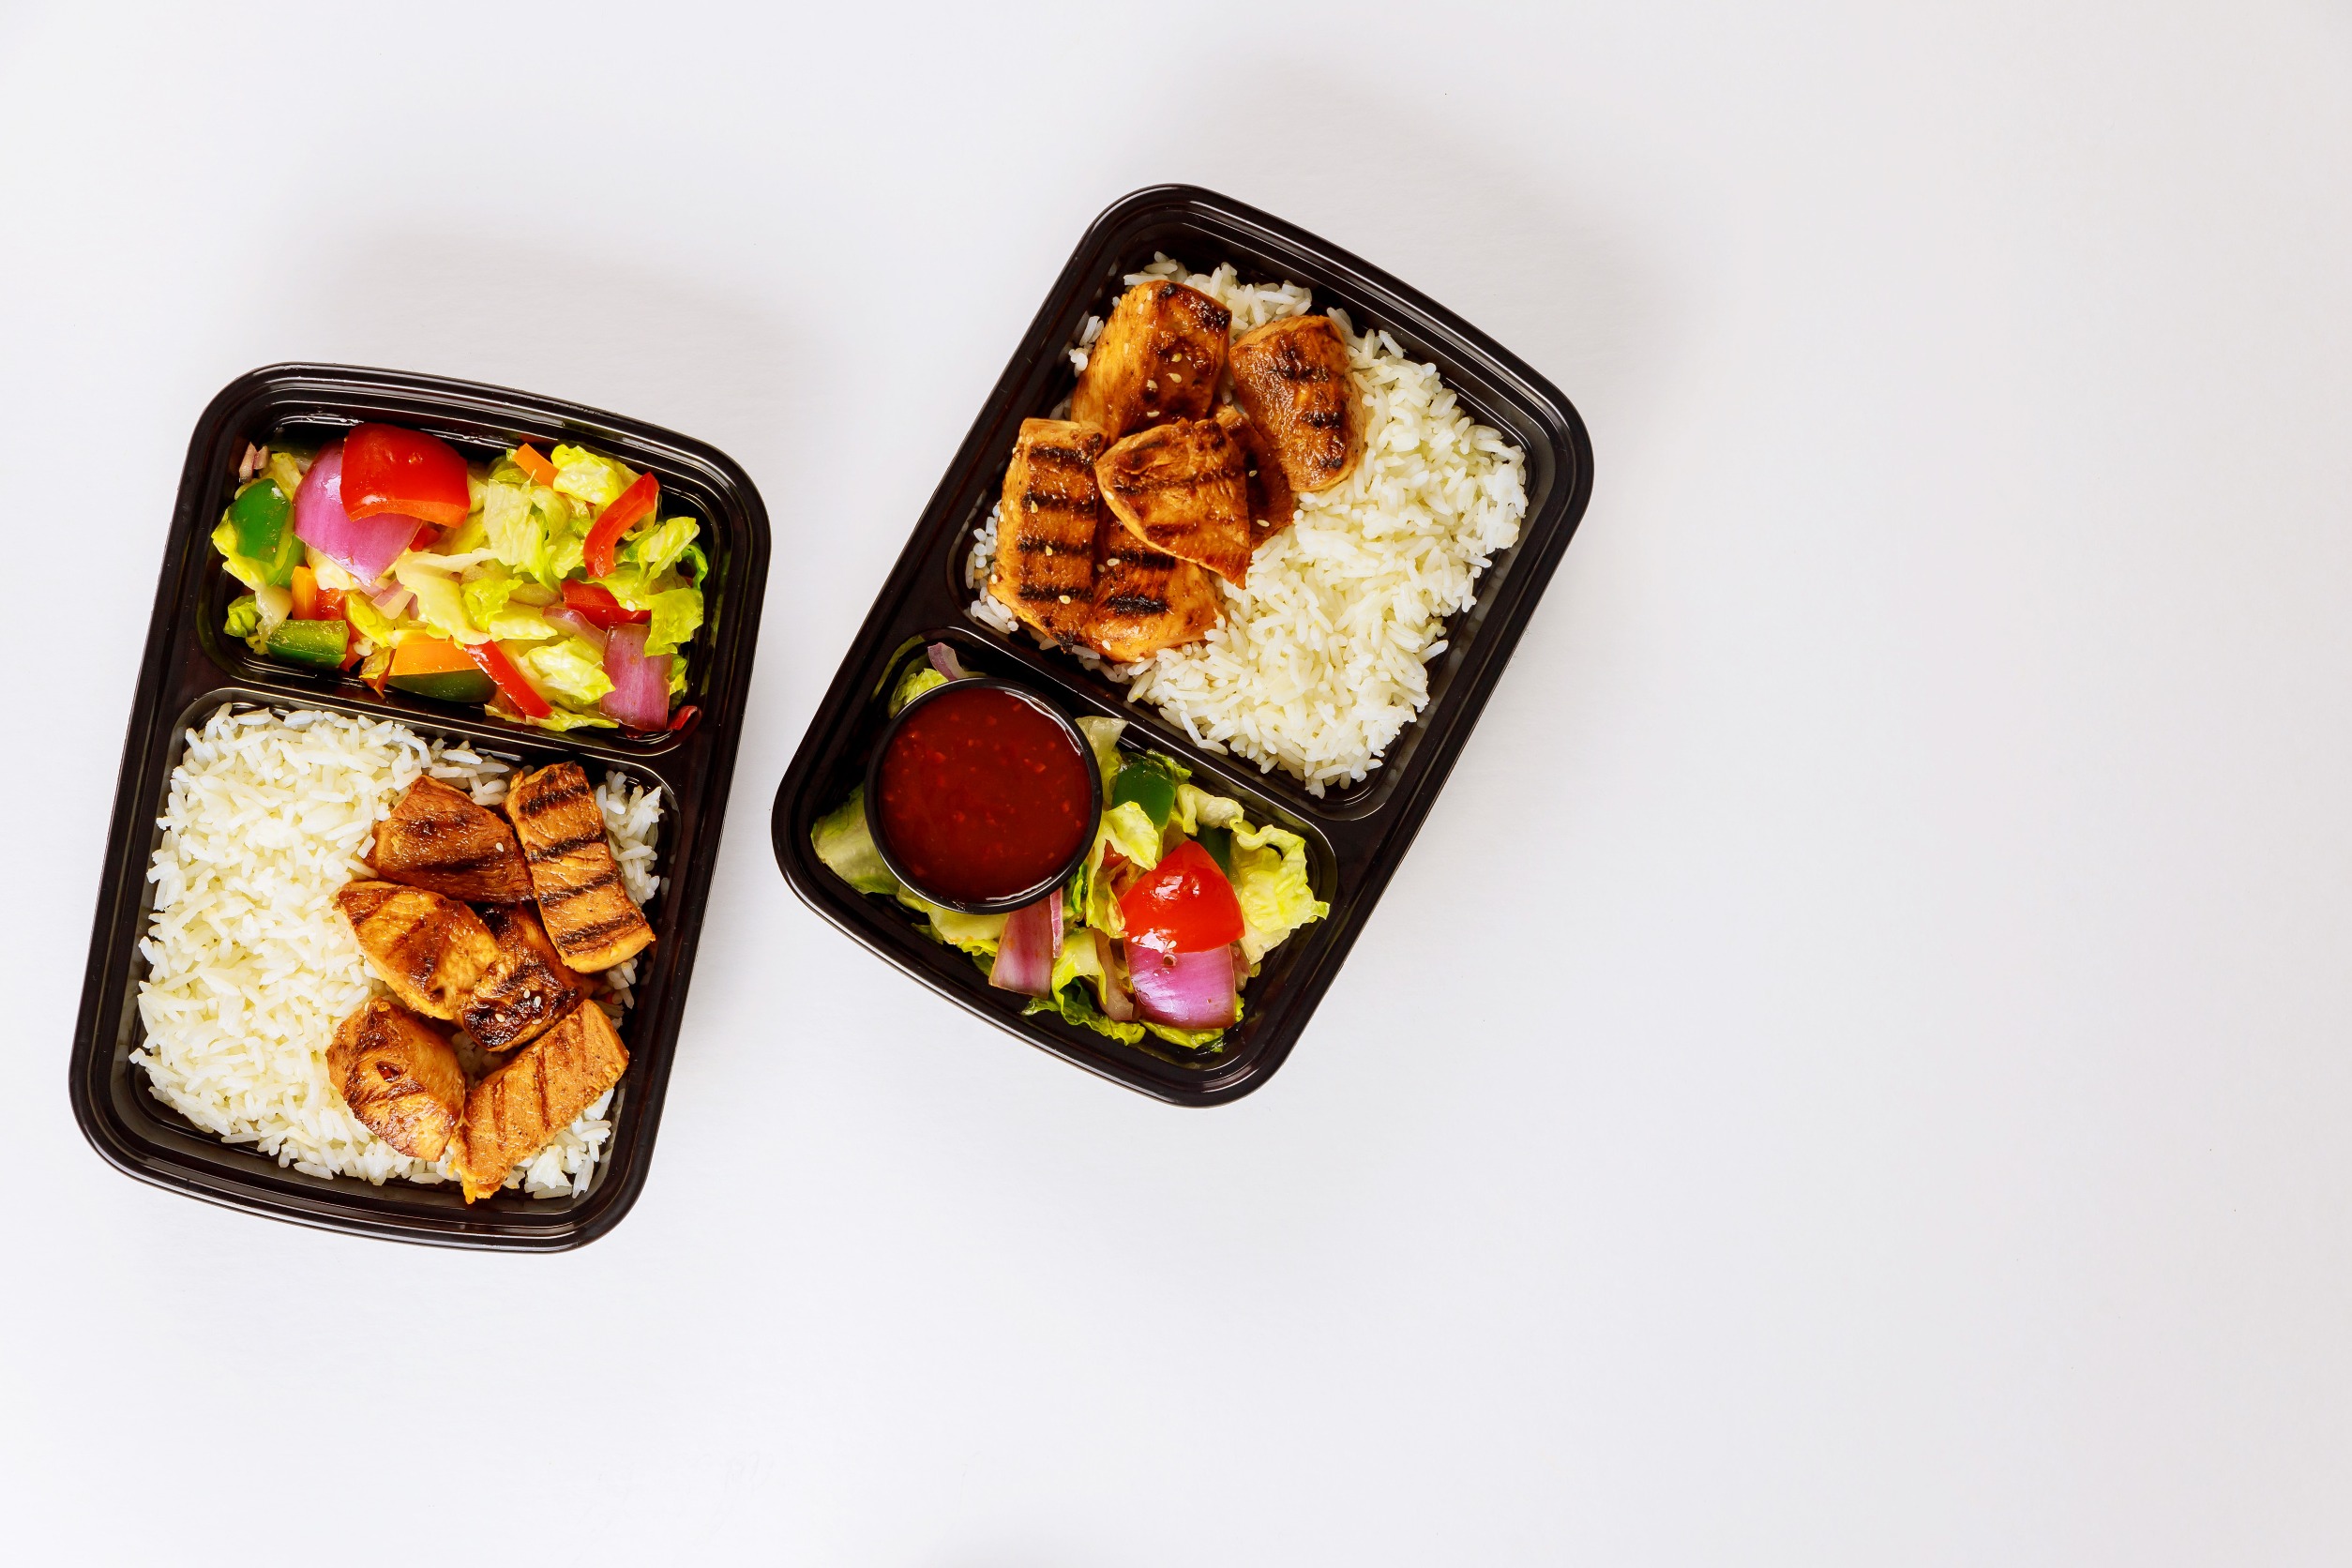 Two ready-to-eat meals with quality ingredients